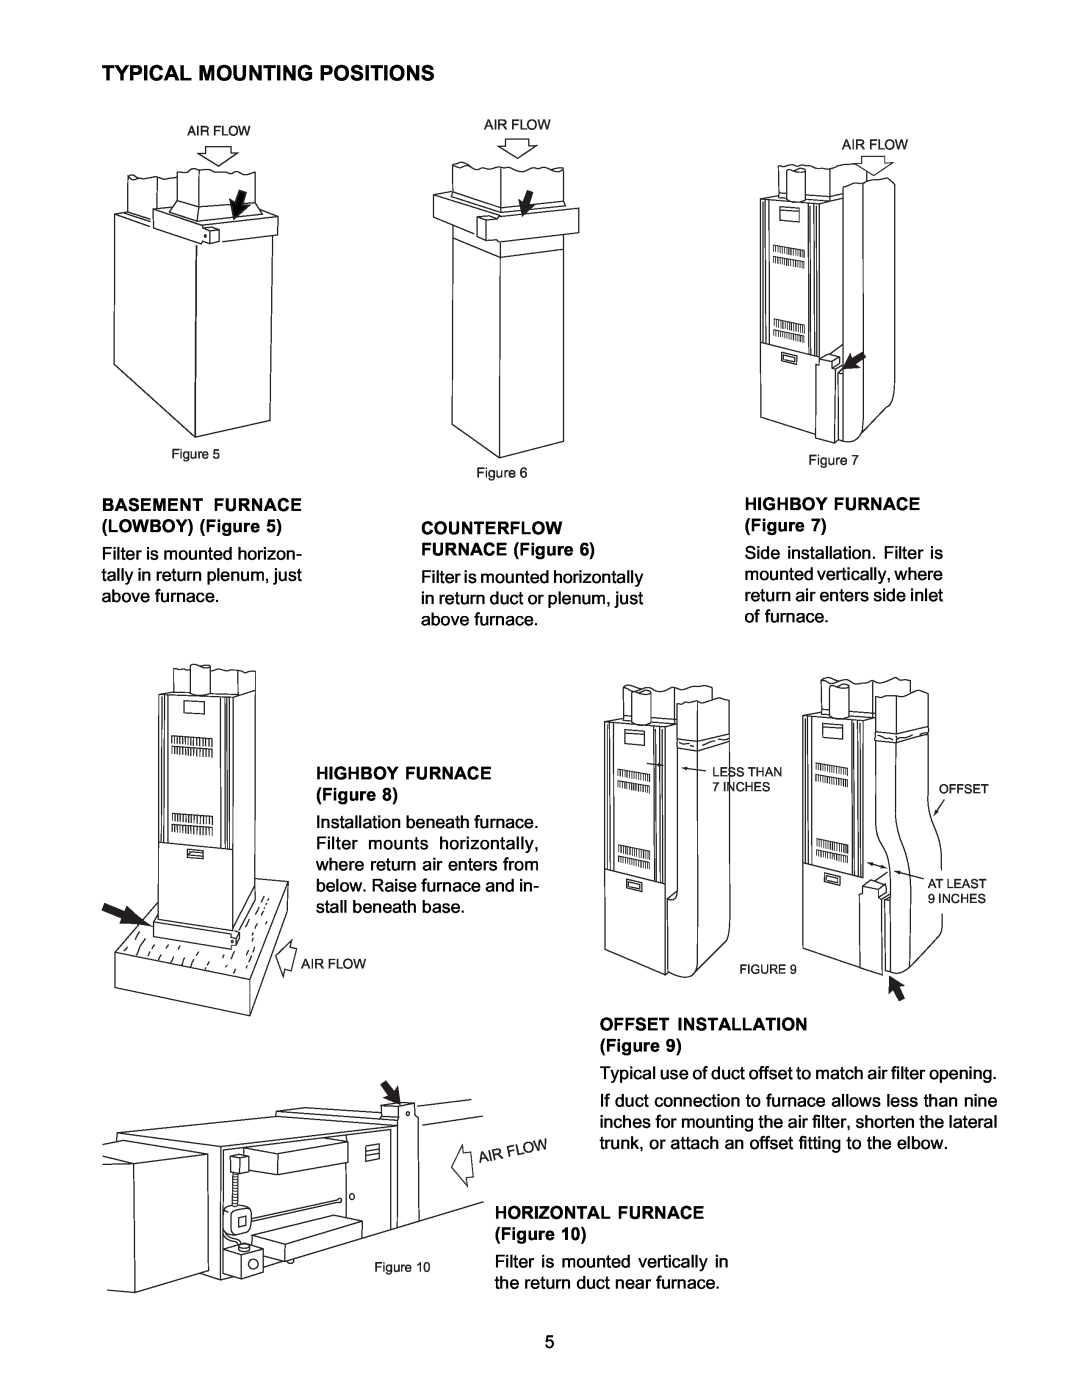 White Rodgers pmnACM/ACB Typical Mounting Positions, BASEMENT FURNACE LOWBOY Figure, COUNTERFLOW FURNACE Figure 